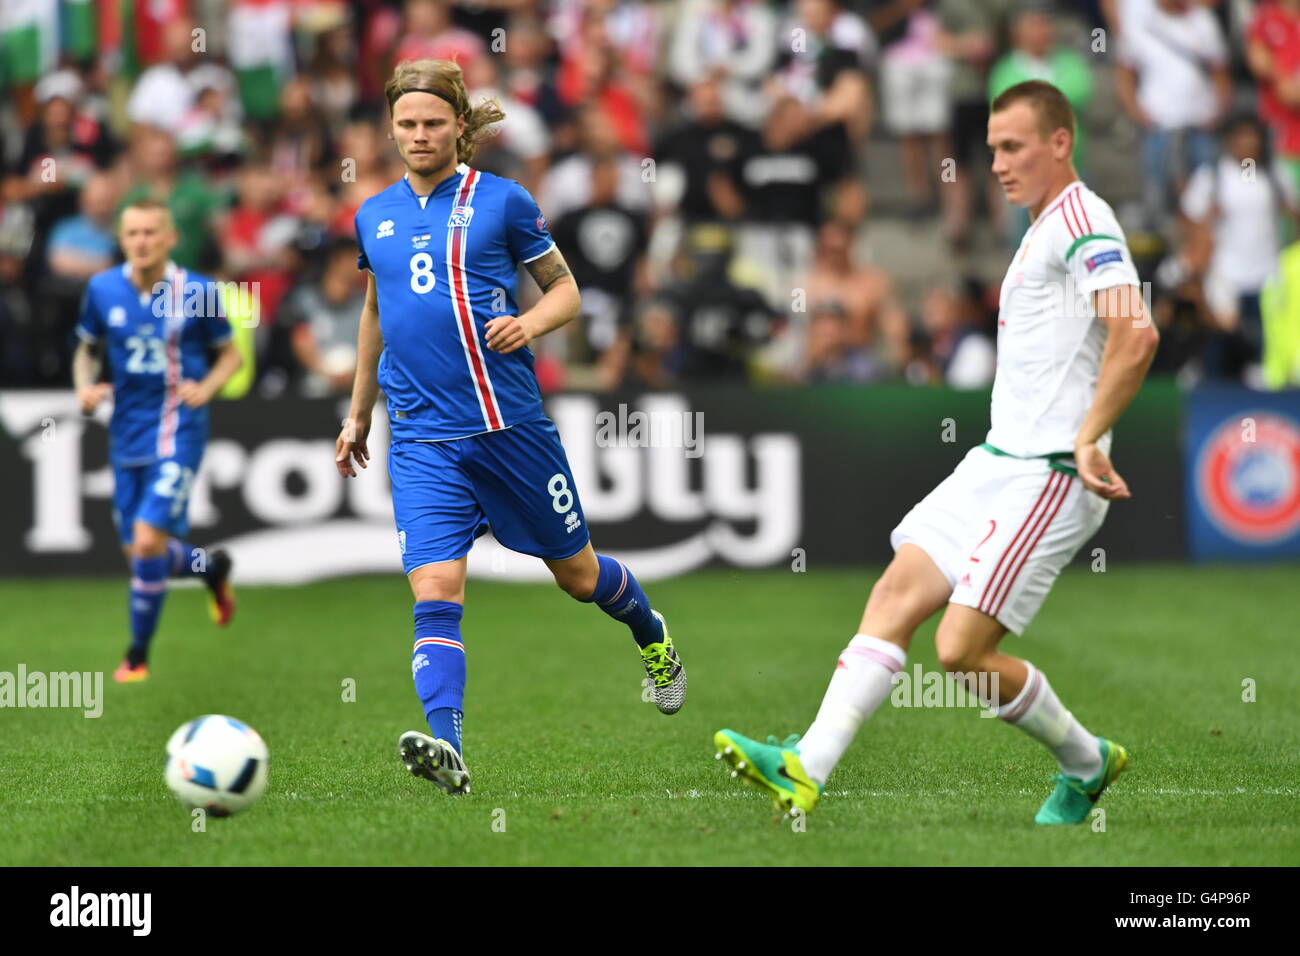 Marseille, France. 18th June, 2016. Birkir Bjarnason (C) of Iceland and Adam Lang (R) of Hungary challenge for the ball during the Uefa Euro 2016 Group F soccer match between Iceland and Hungary at the Stade Velodrome in Marseille, France, June 18, 2016. Photo: Federico Gambarini/dpa/Alamy Live News Stock Photo